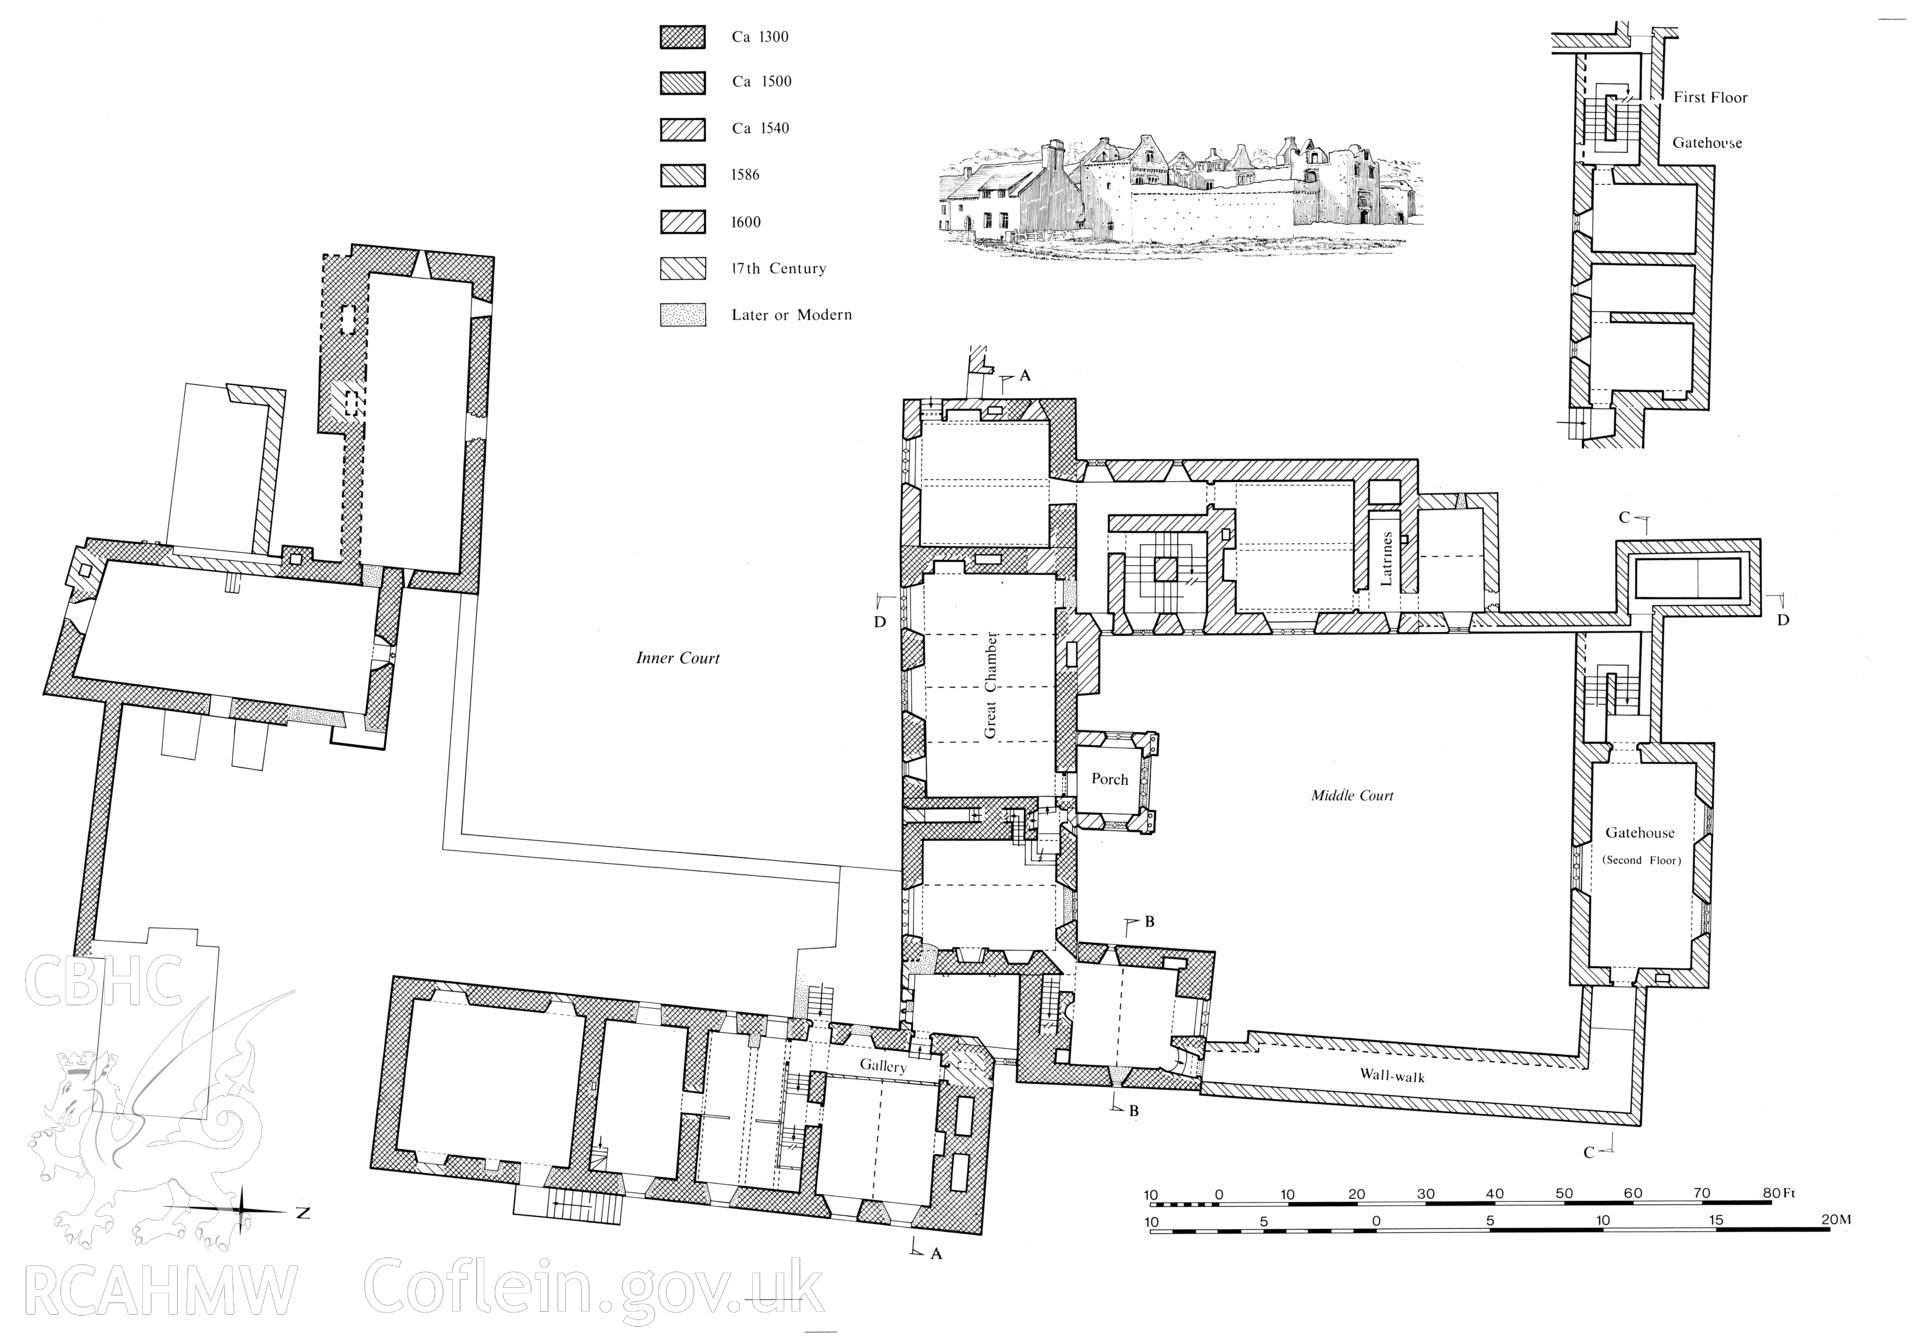 RCAHMW drawing showing plan and elevation of Old Beaupre, St Hilary, published in Glamorgan IV, fig 3